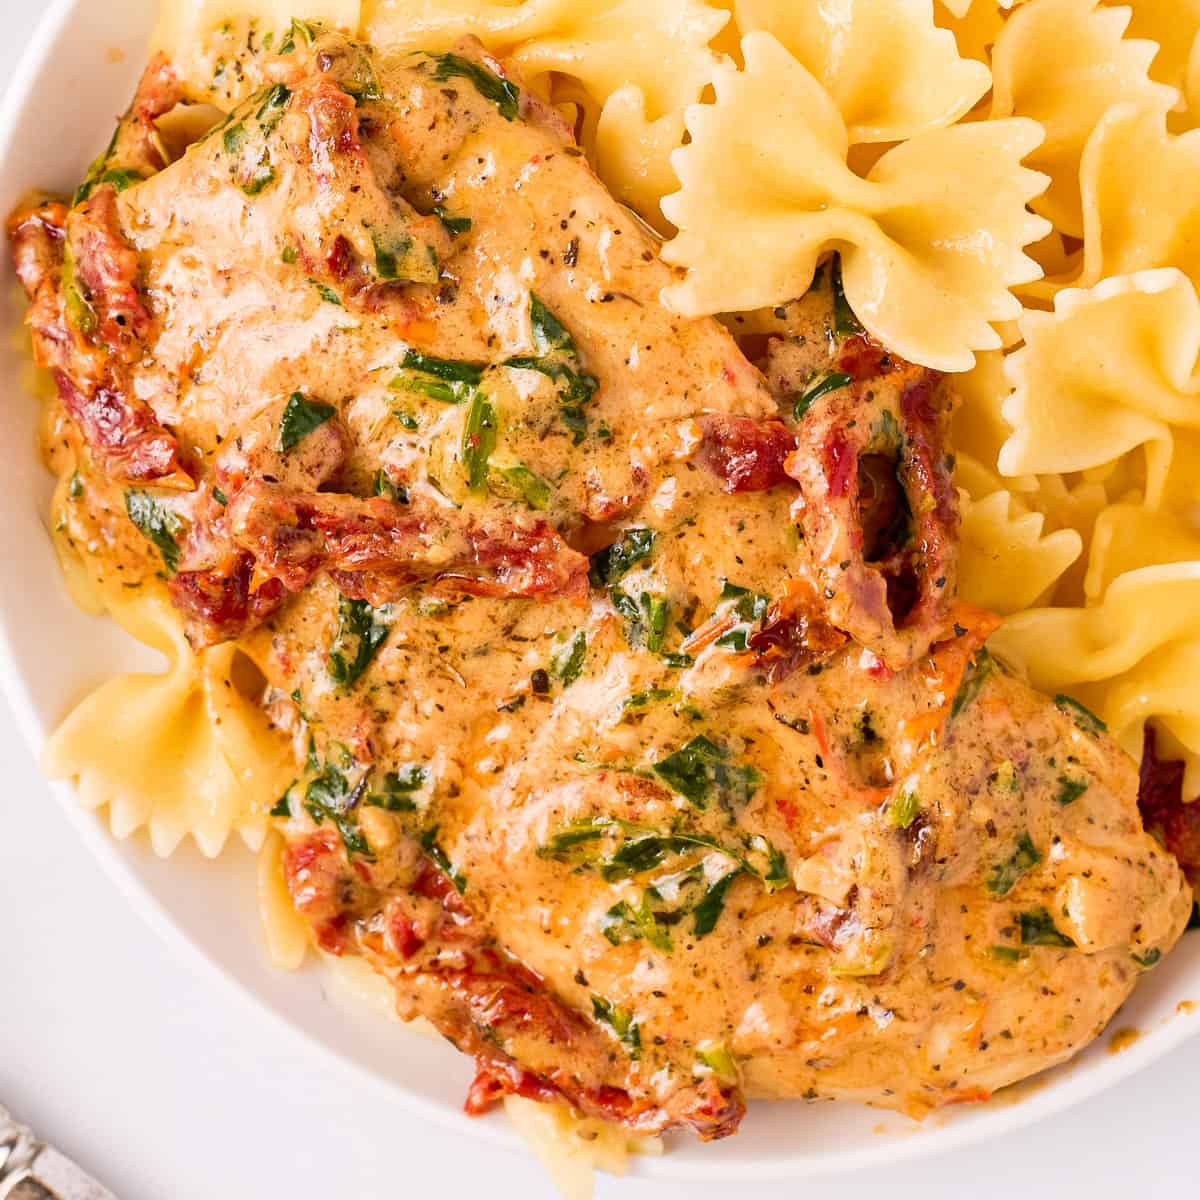 https://www.thechunkychef.com/wp-content/uploads/2022/08/One-Pan-Creamy-Tuscan-Chicken-recipe-card.jpg